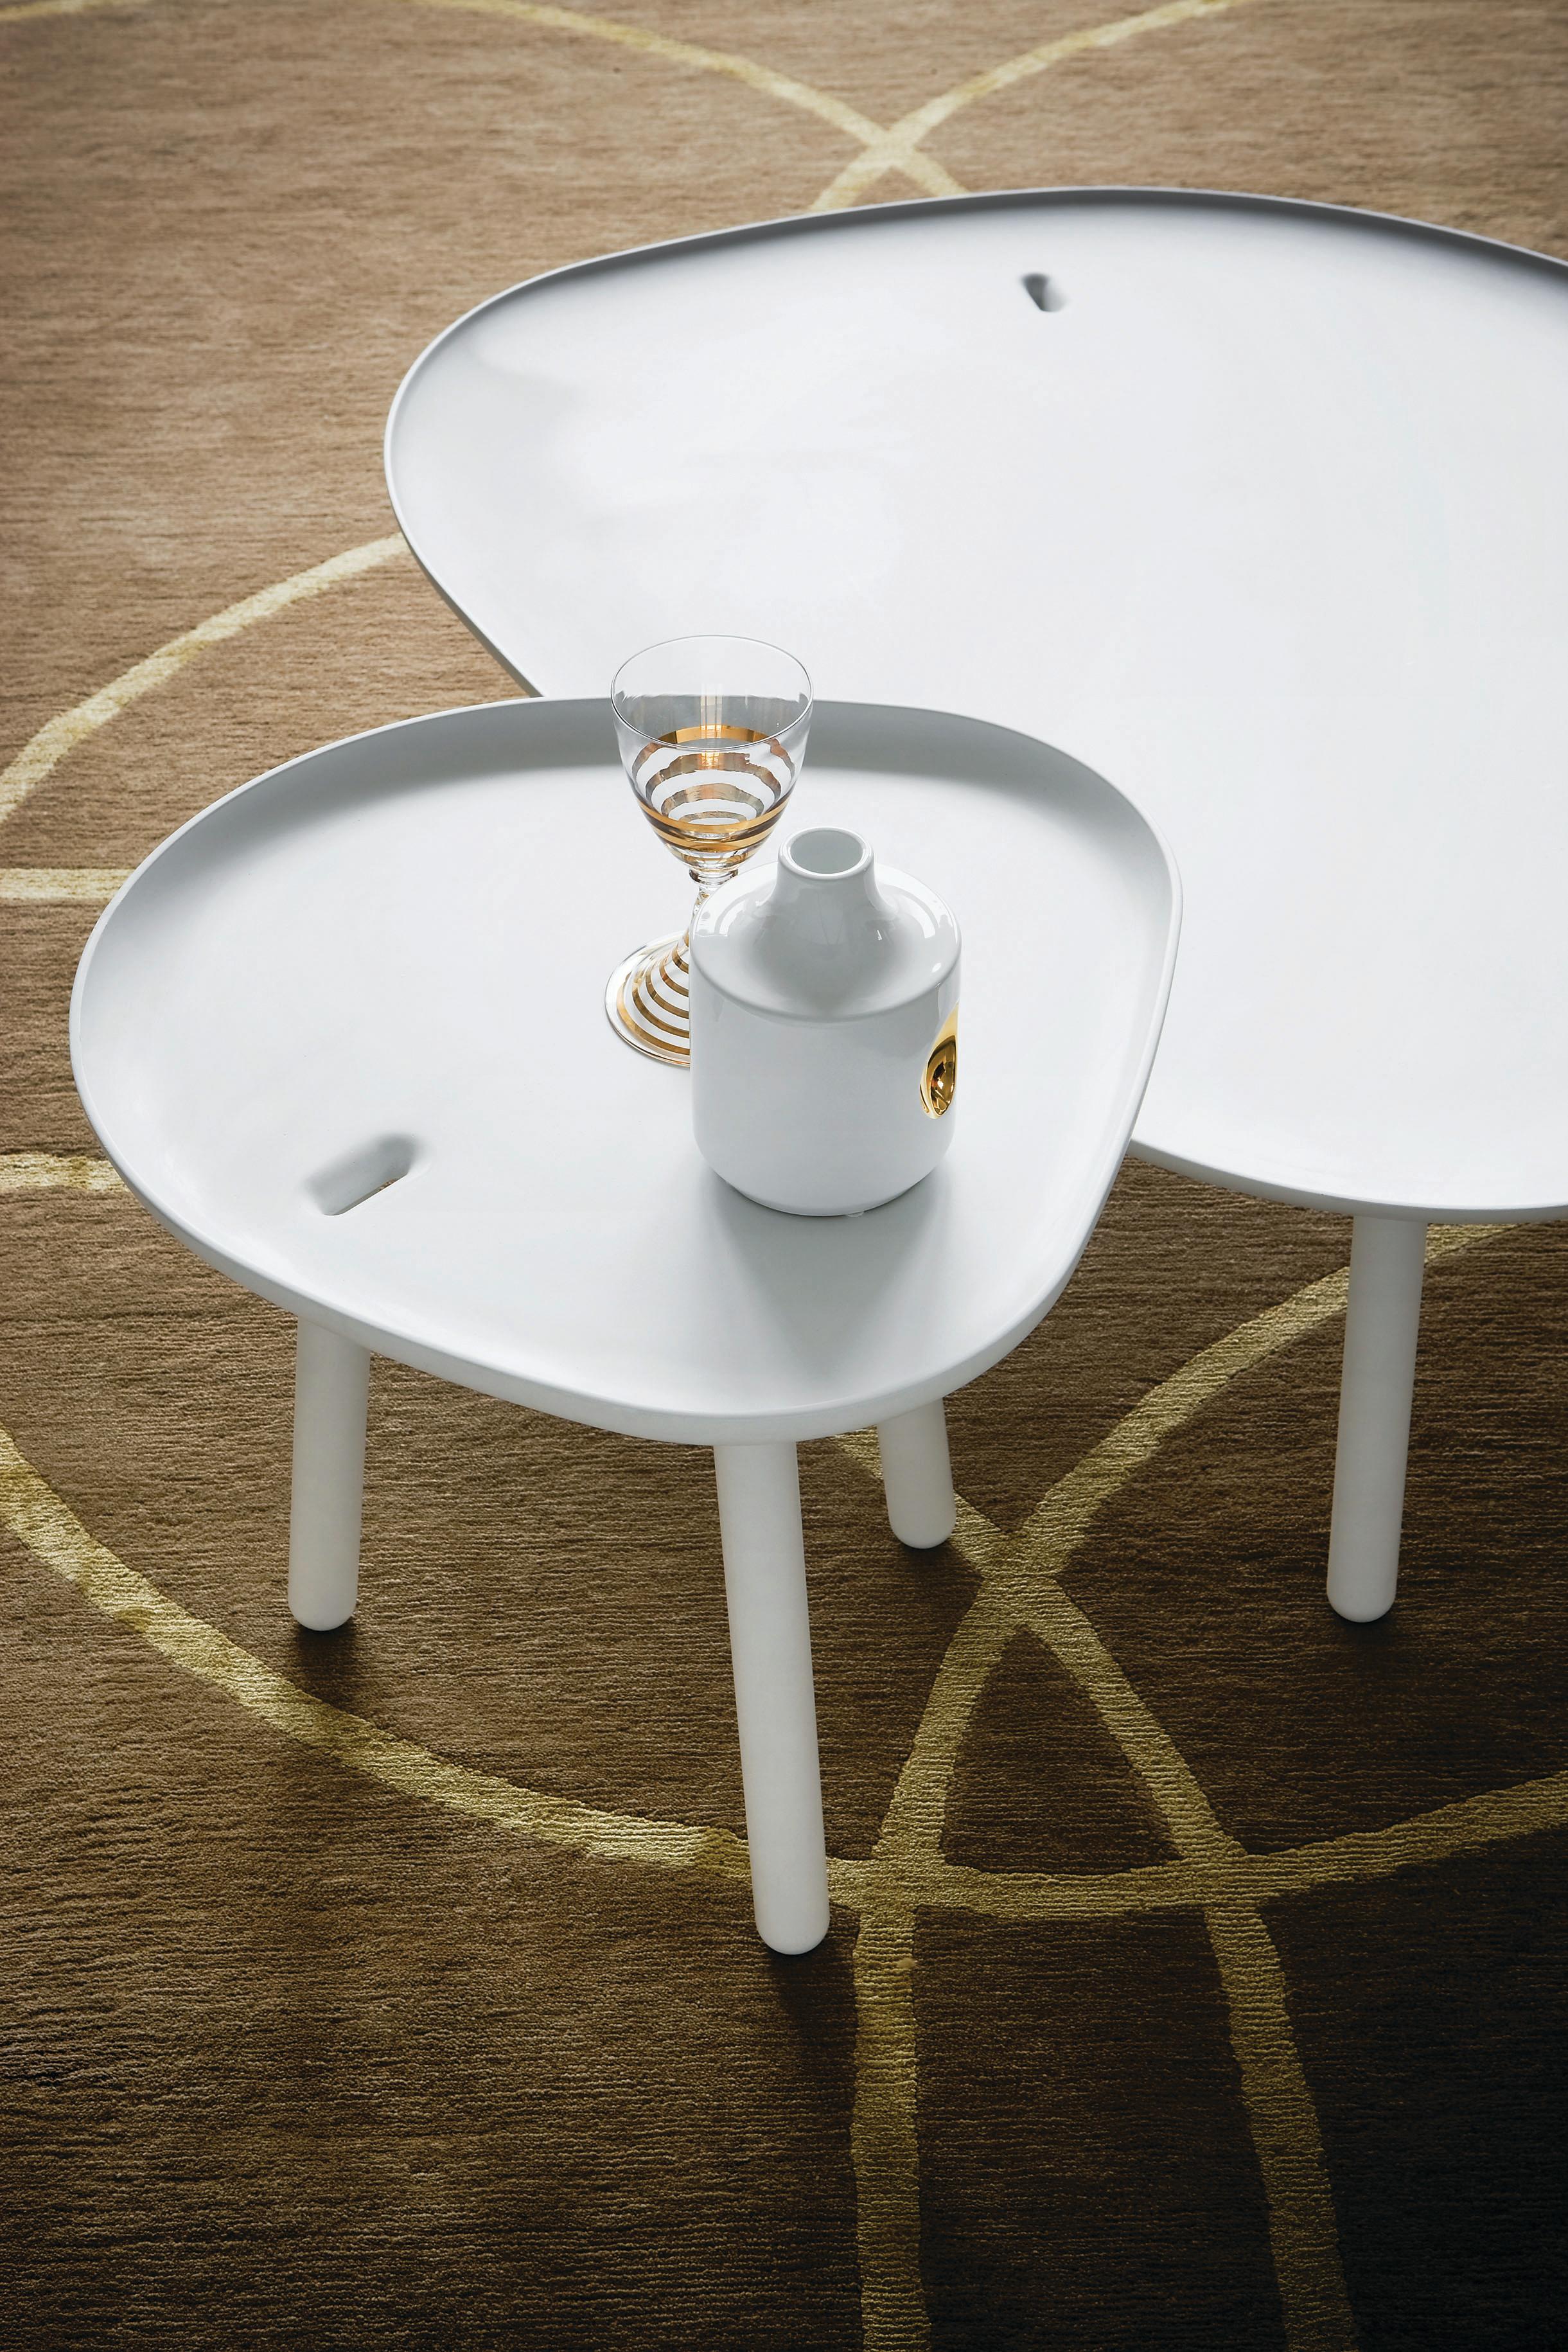 Zanotta Loto Small Table in White Acrylic Resin by Ludovica+Roberto Palomba

Top and legs in Cristalplant outdoor®, composite material based on polyester and acrylic resins loaded with minerals and mass pigmented in the shade of matt